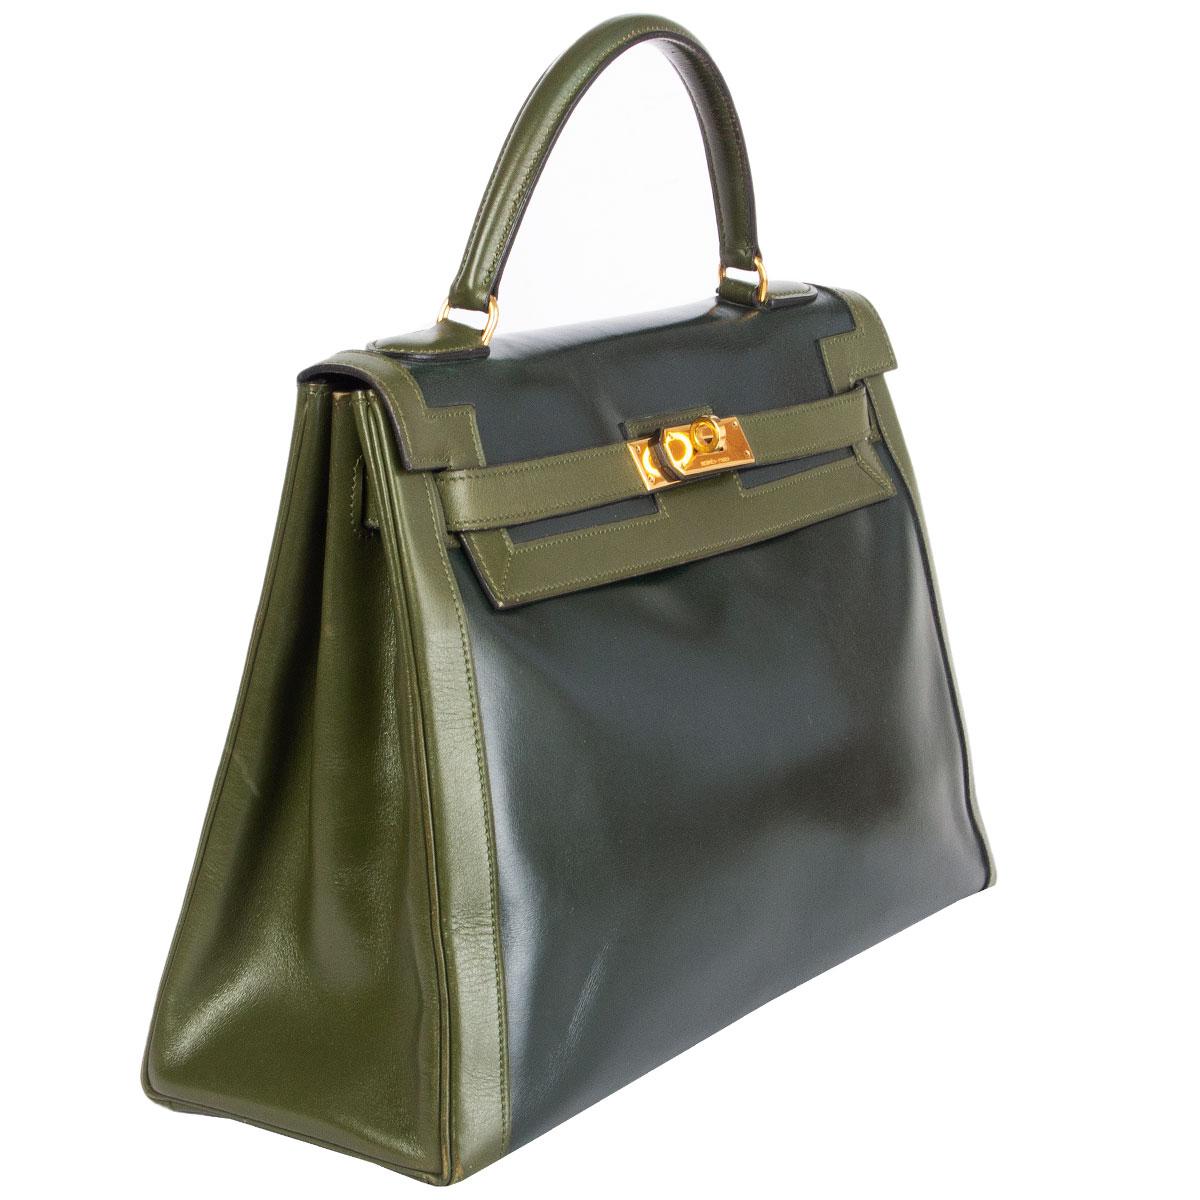 100% authentic Hermes Kelly I 32 Retourner Bi-Color bag in Vert Fonce (dark green) Veau Box leather with leaf green trimming and handle. Super rare color combination from 1981. Gold-plated hardware. Lined in Vert Fonce Chevre (goat skin) with two